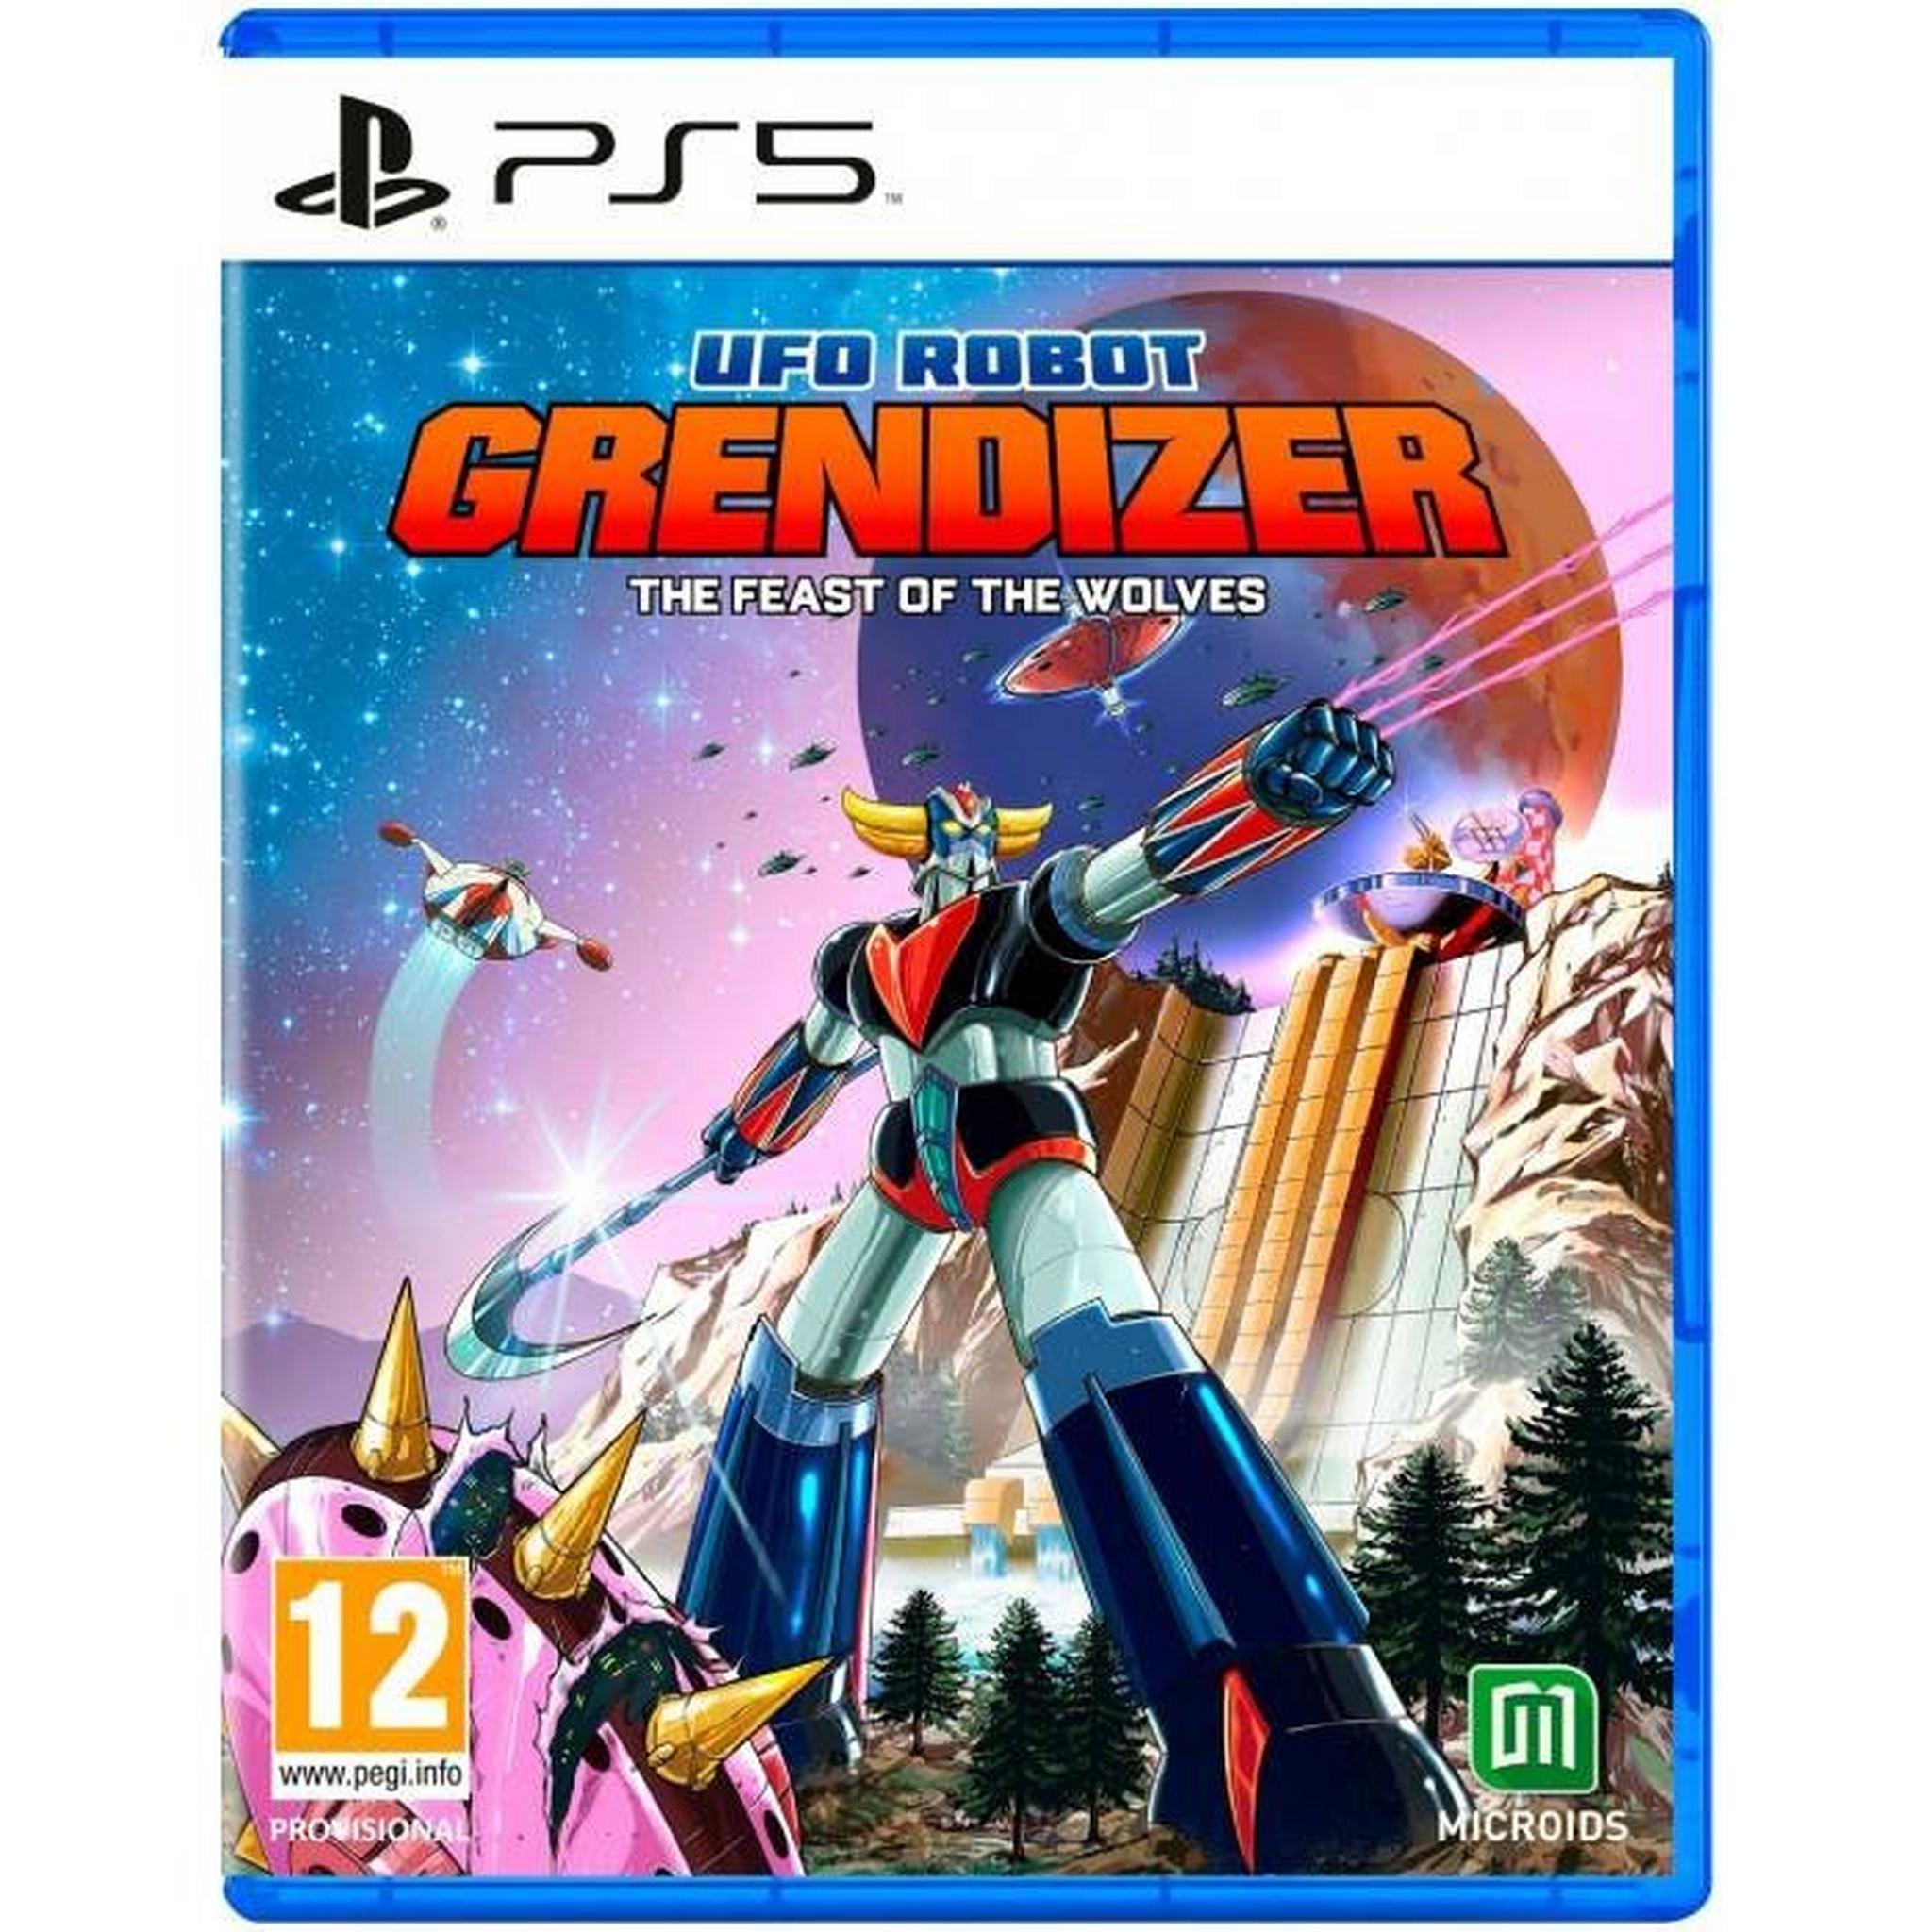 UFO Robot Grendizer - The Feast of The Wolves Edition – PS5 Game